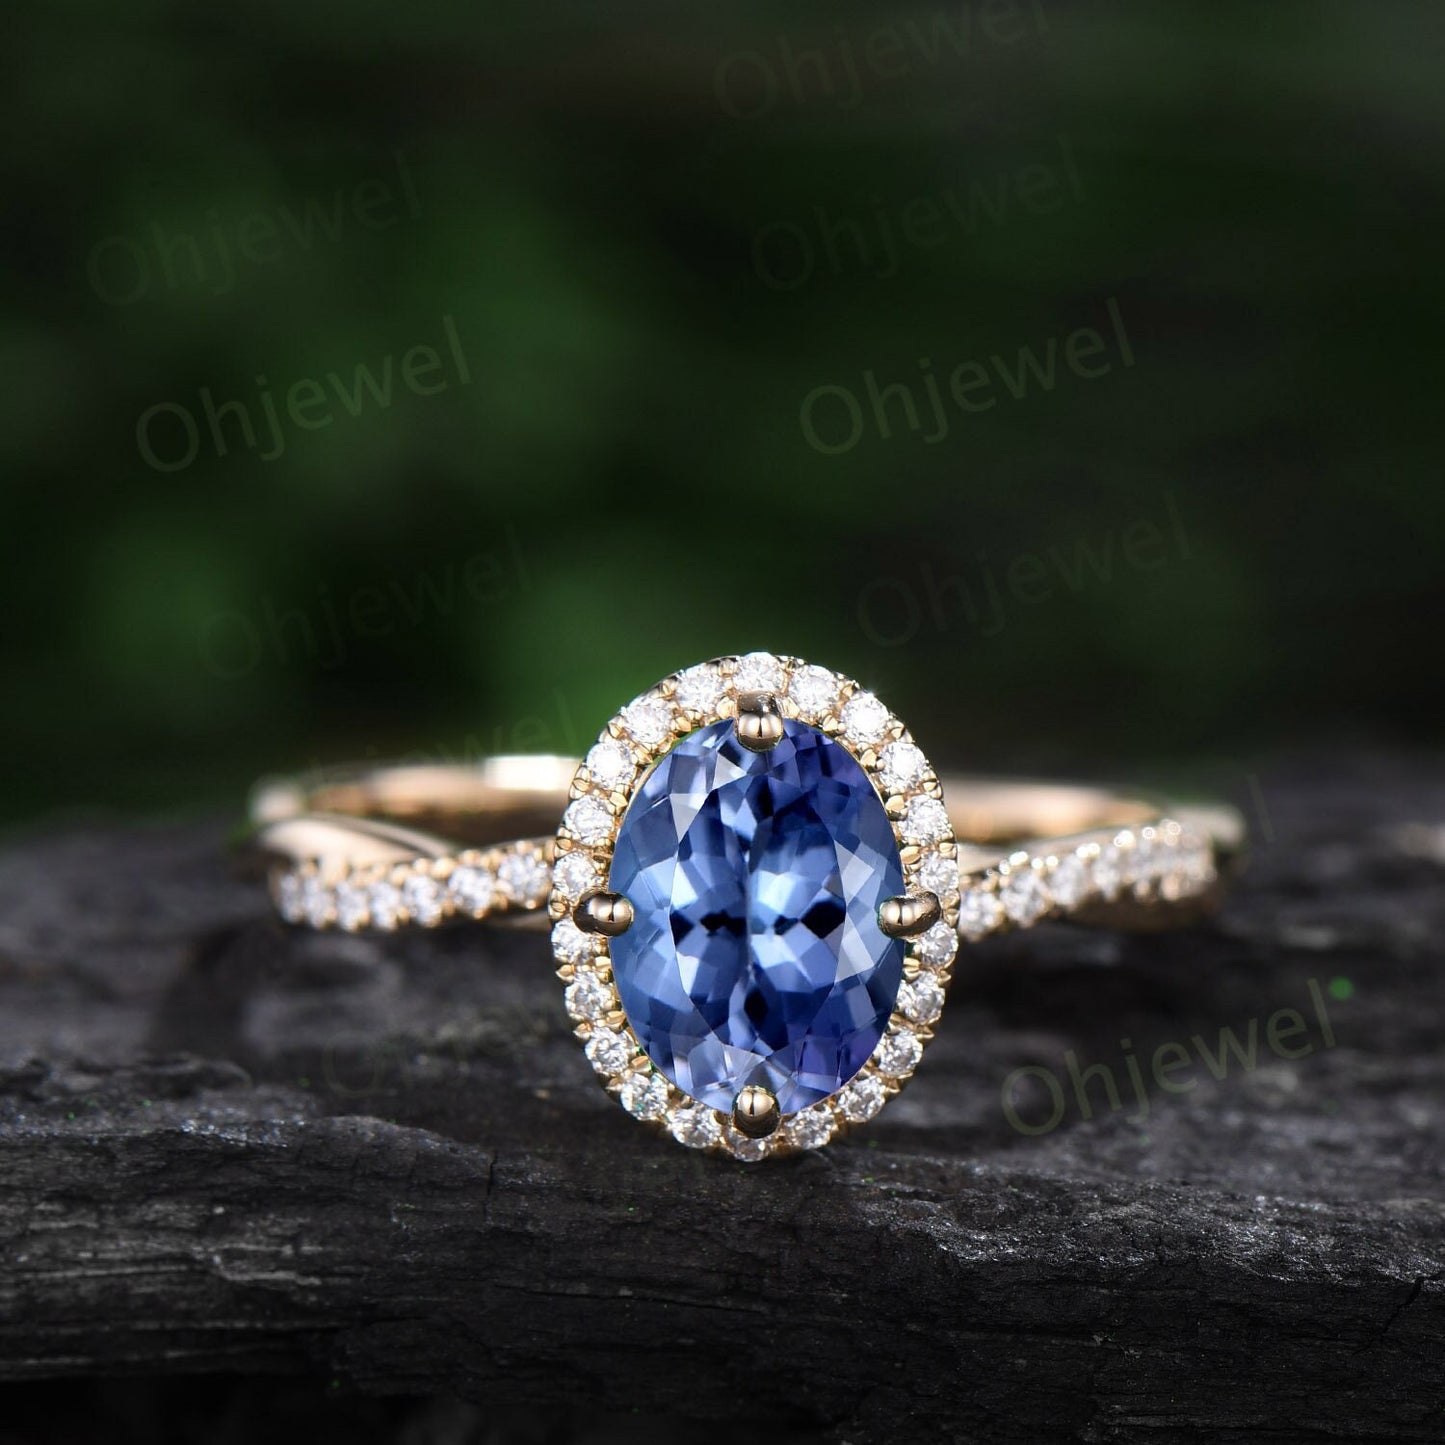 Oval natural Tanzanite ring vintage unique engagement ring halo twisted diamond ring prong set fine jewelry yellow gold bridal ring women